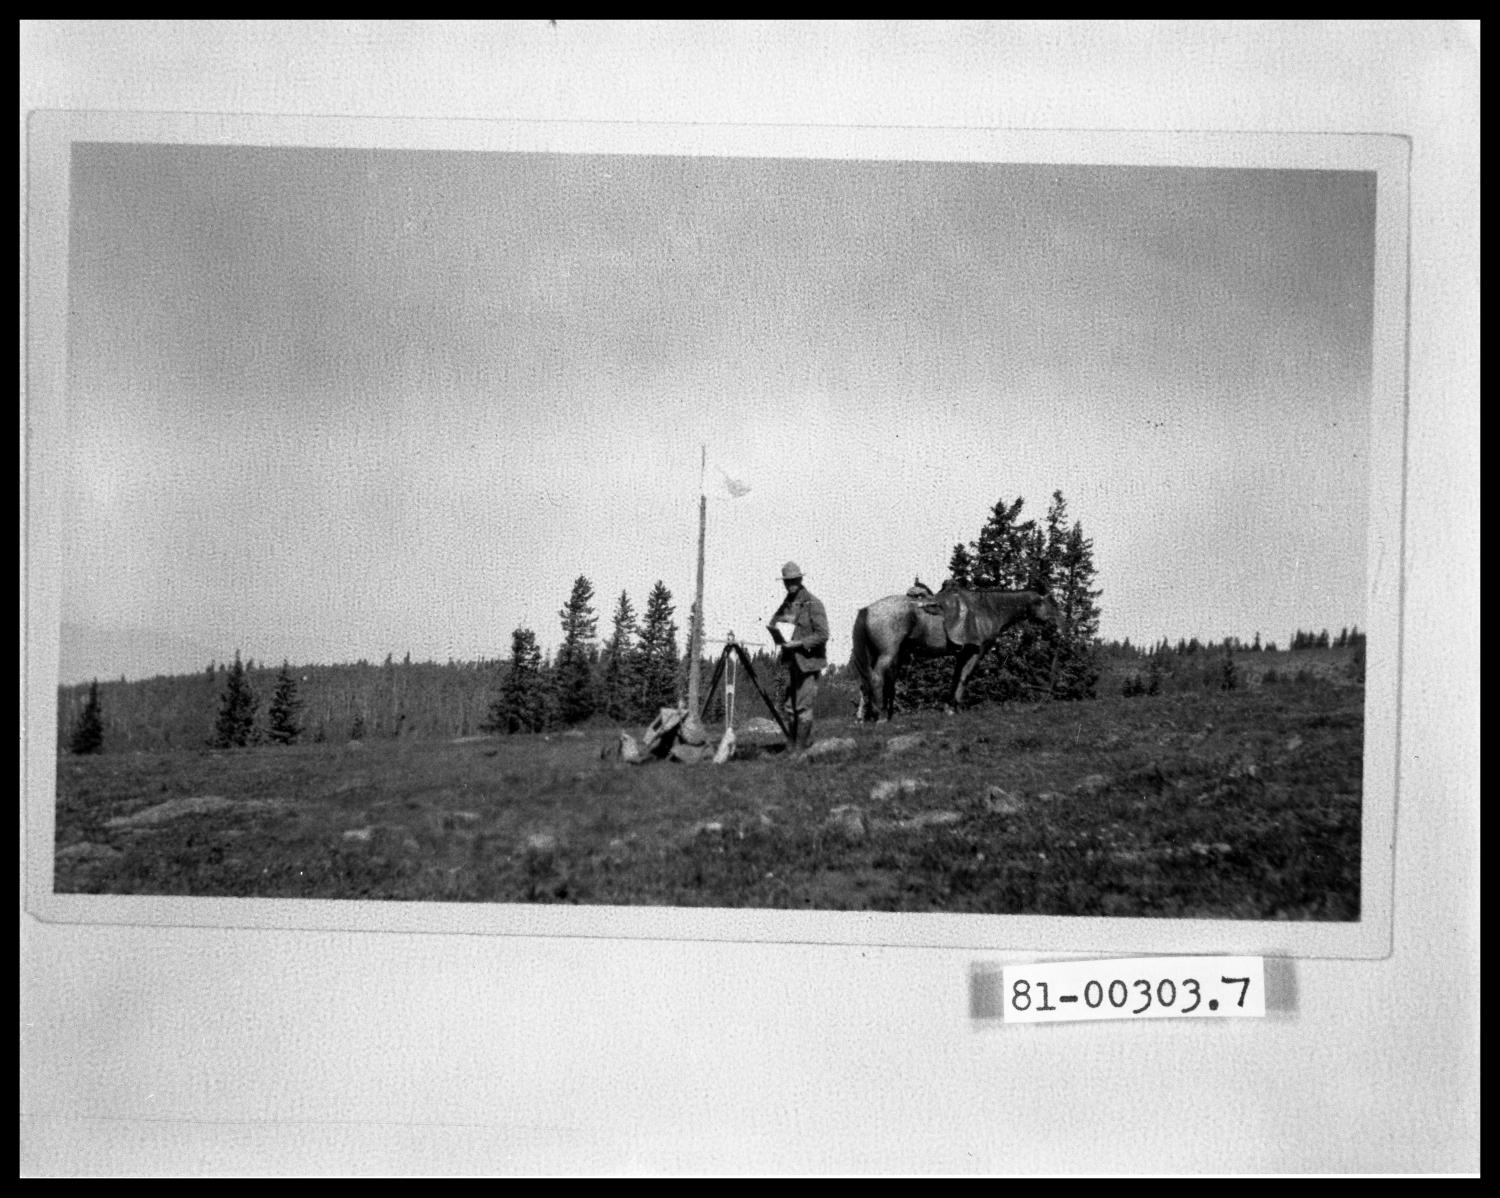 Surveyor With Horse and Survey Equipment
                                                
                                                    [Sequence #]: 1 of 1
                                                